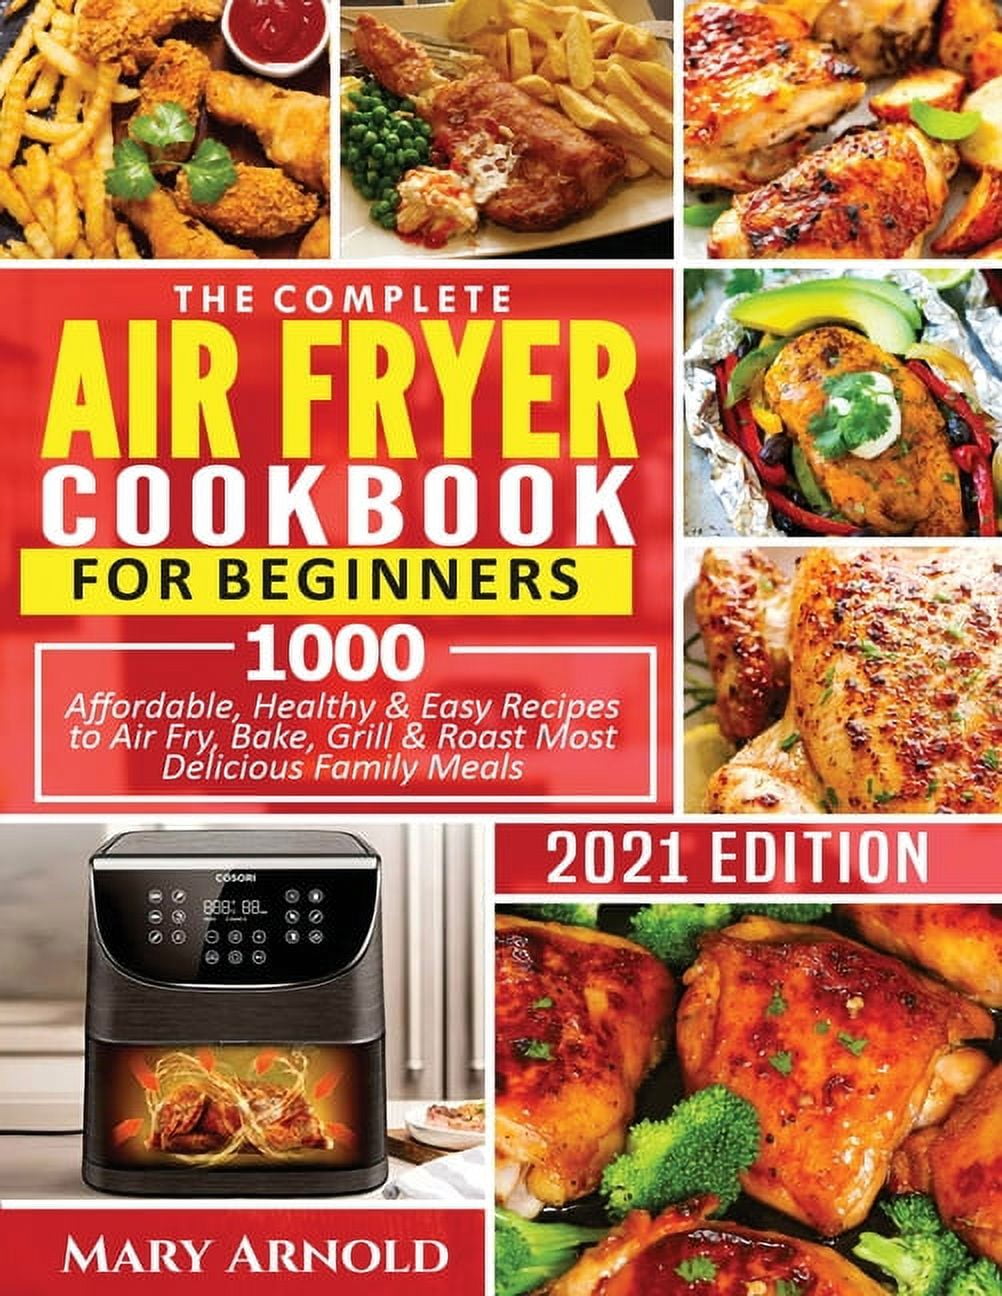 The Essential BLACK+DECKER Air Fryer Oven Cookbook: 200 Crispy, Delicious  And Healthy Recipes To Fry, Bake, Grill, And Roast For Beginners